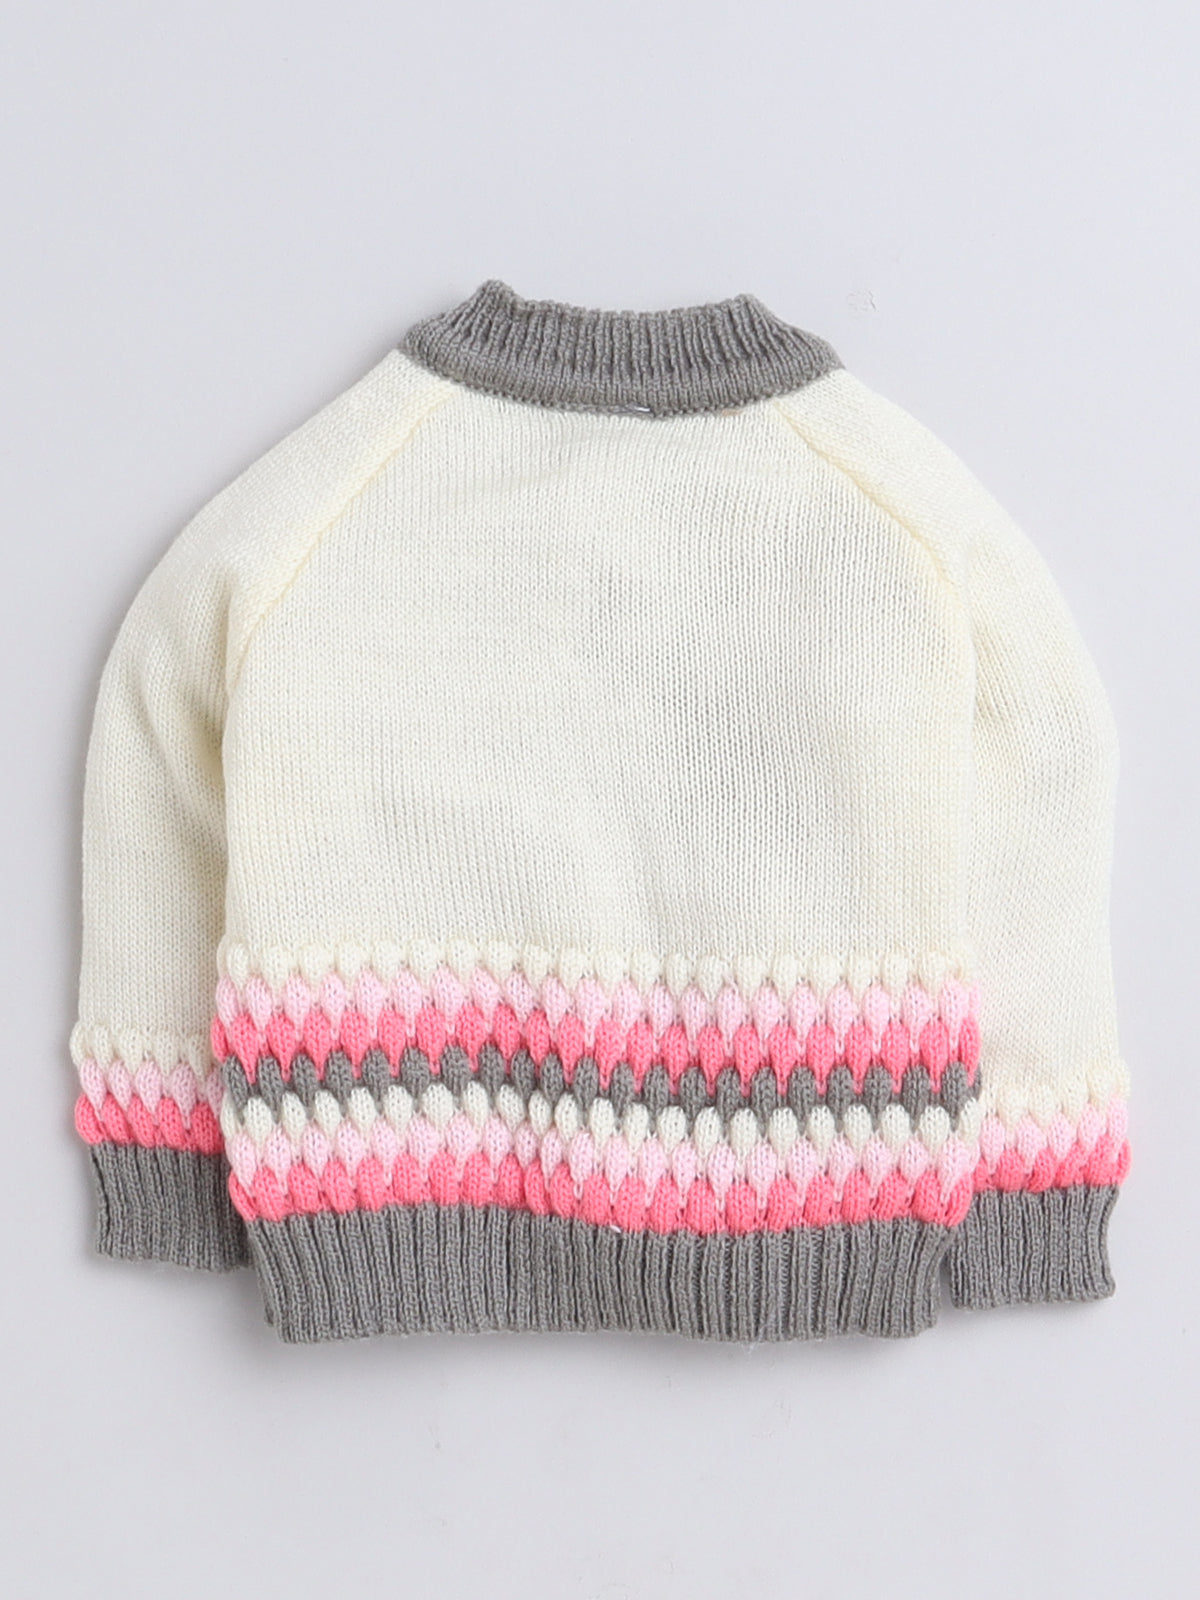 3 Pcs Sweater  Full Sleeve Front open bubblegum color with matching caps and socks